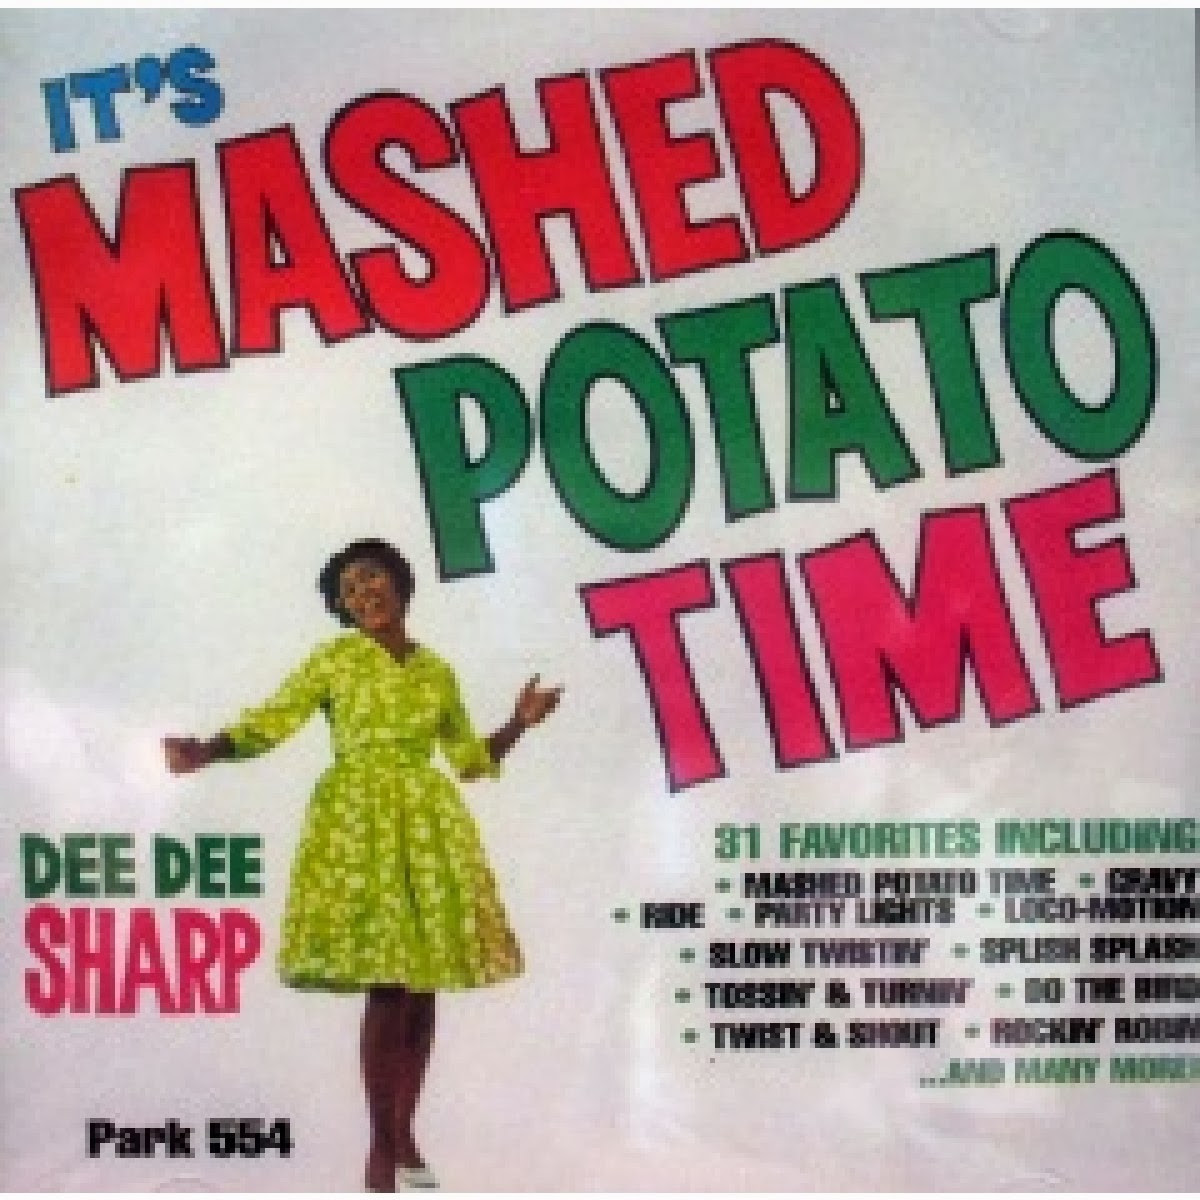 The Mashed Potato Dance
 Peter Kramer Updates "You ll Find This Dance Is Cool to